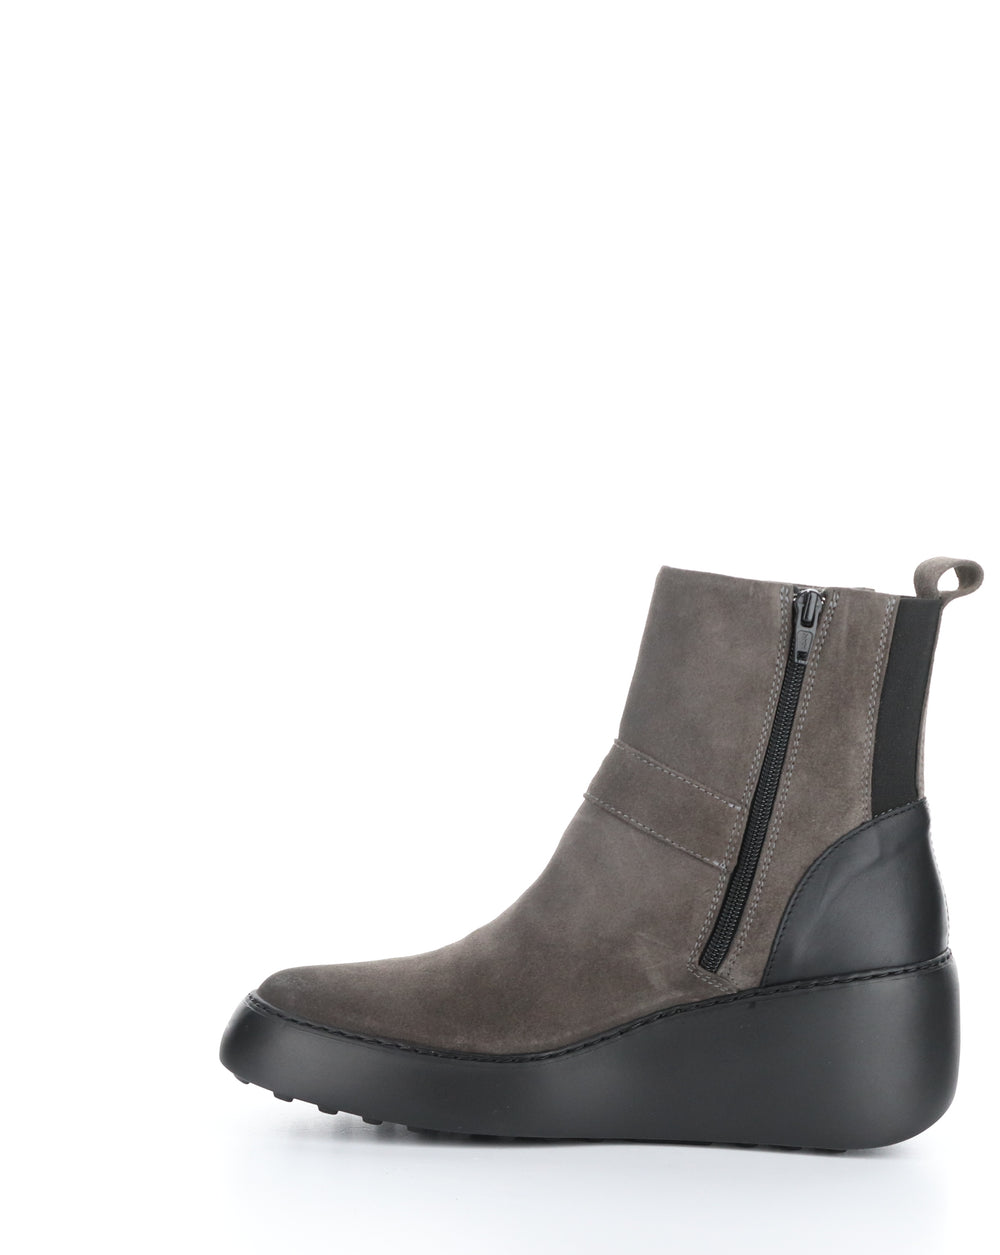 DOXE604FLY 001 ANTHRACITE/BLACK Elasticated Boots